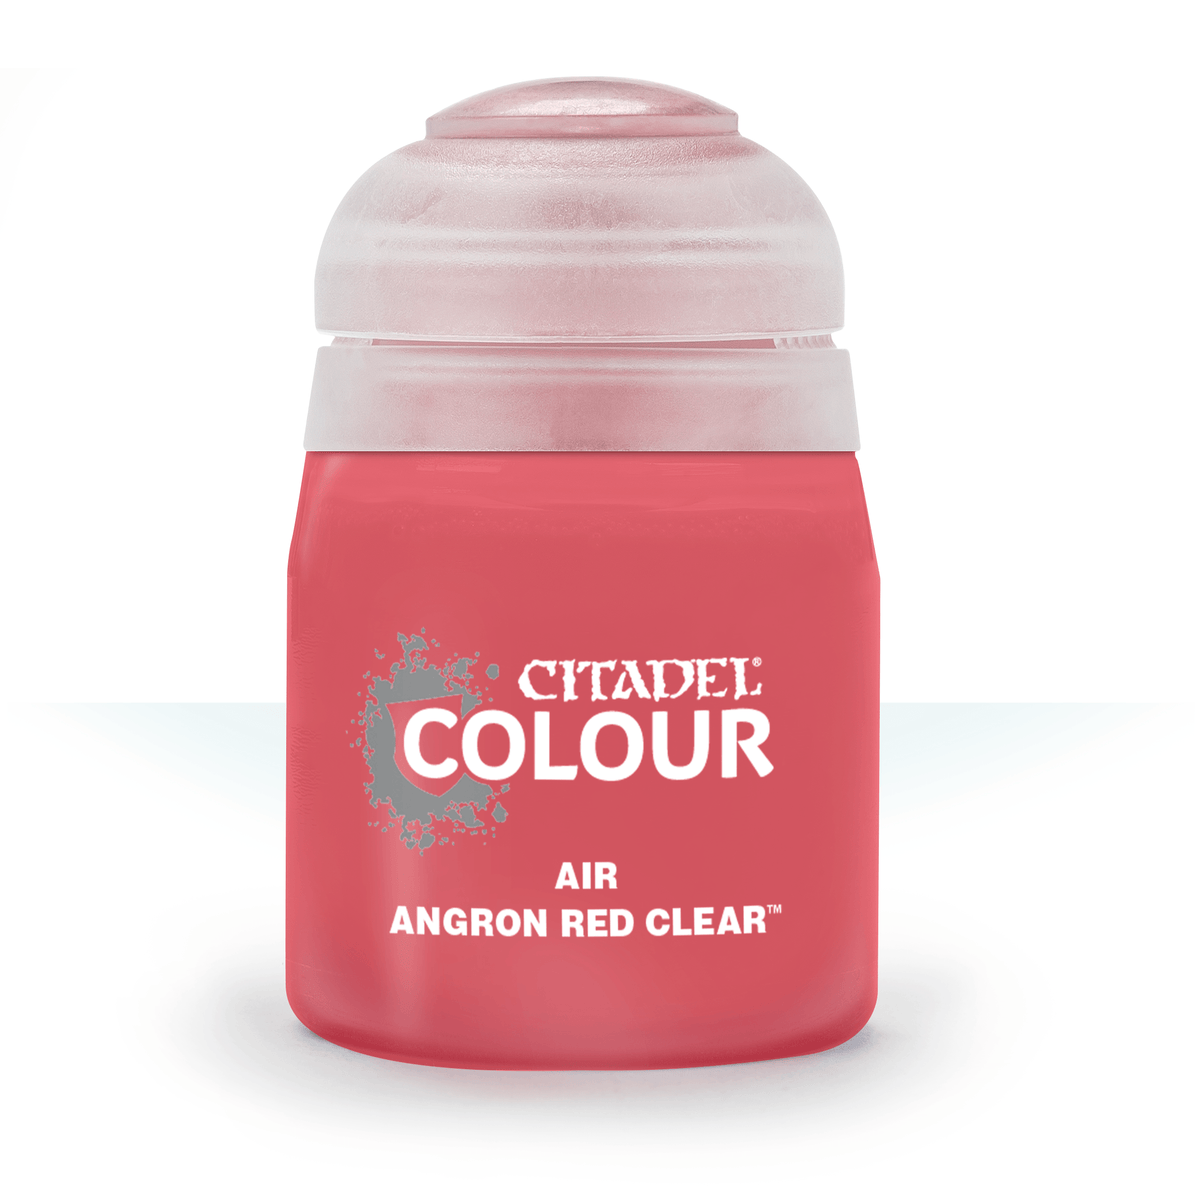 Citadel Air - Angron Red Clear (24ml)